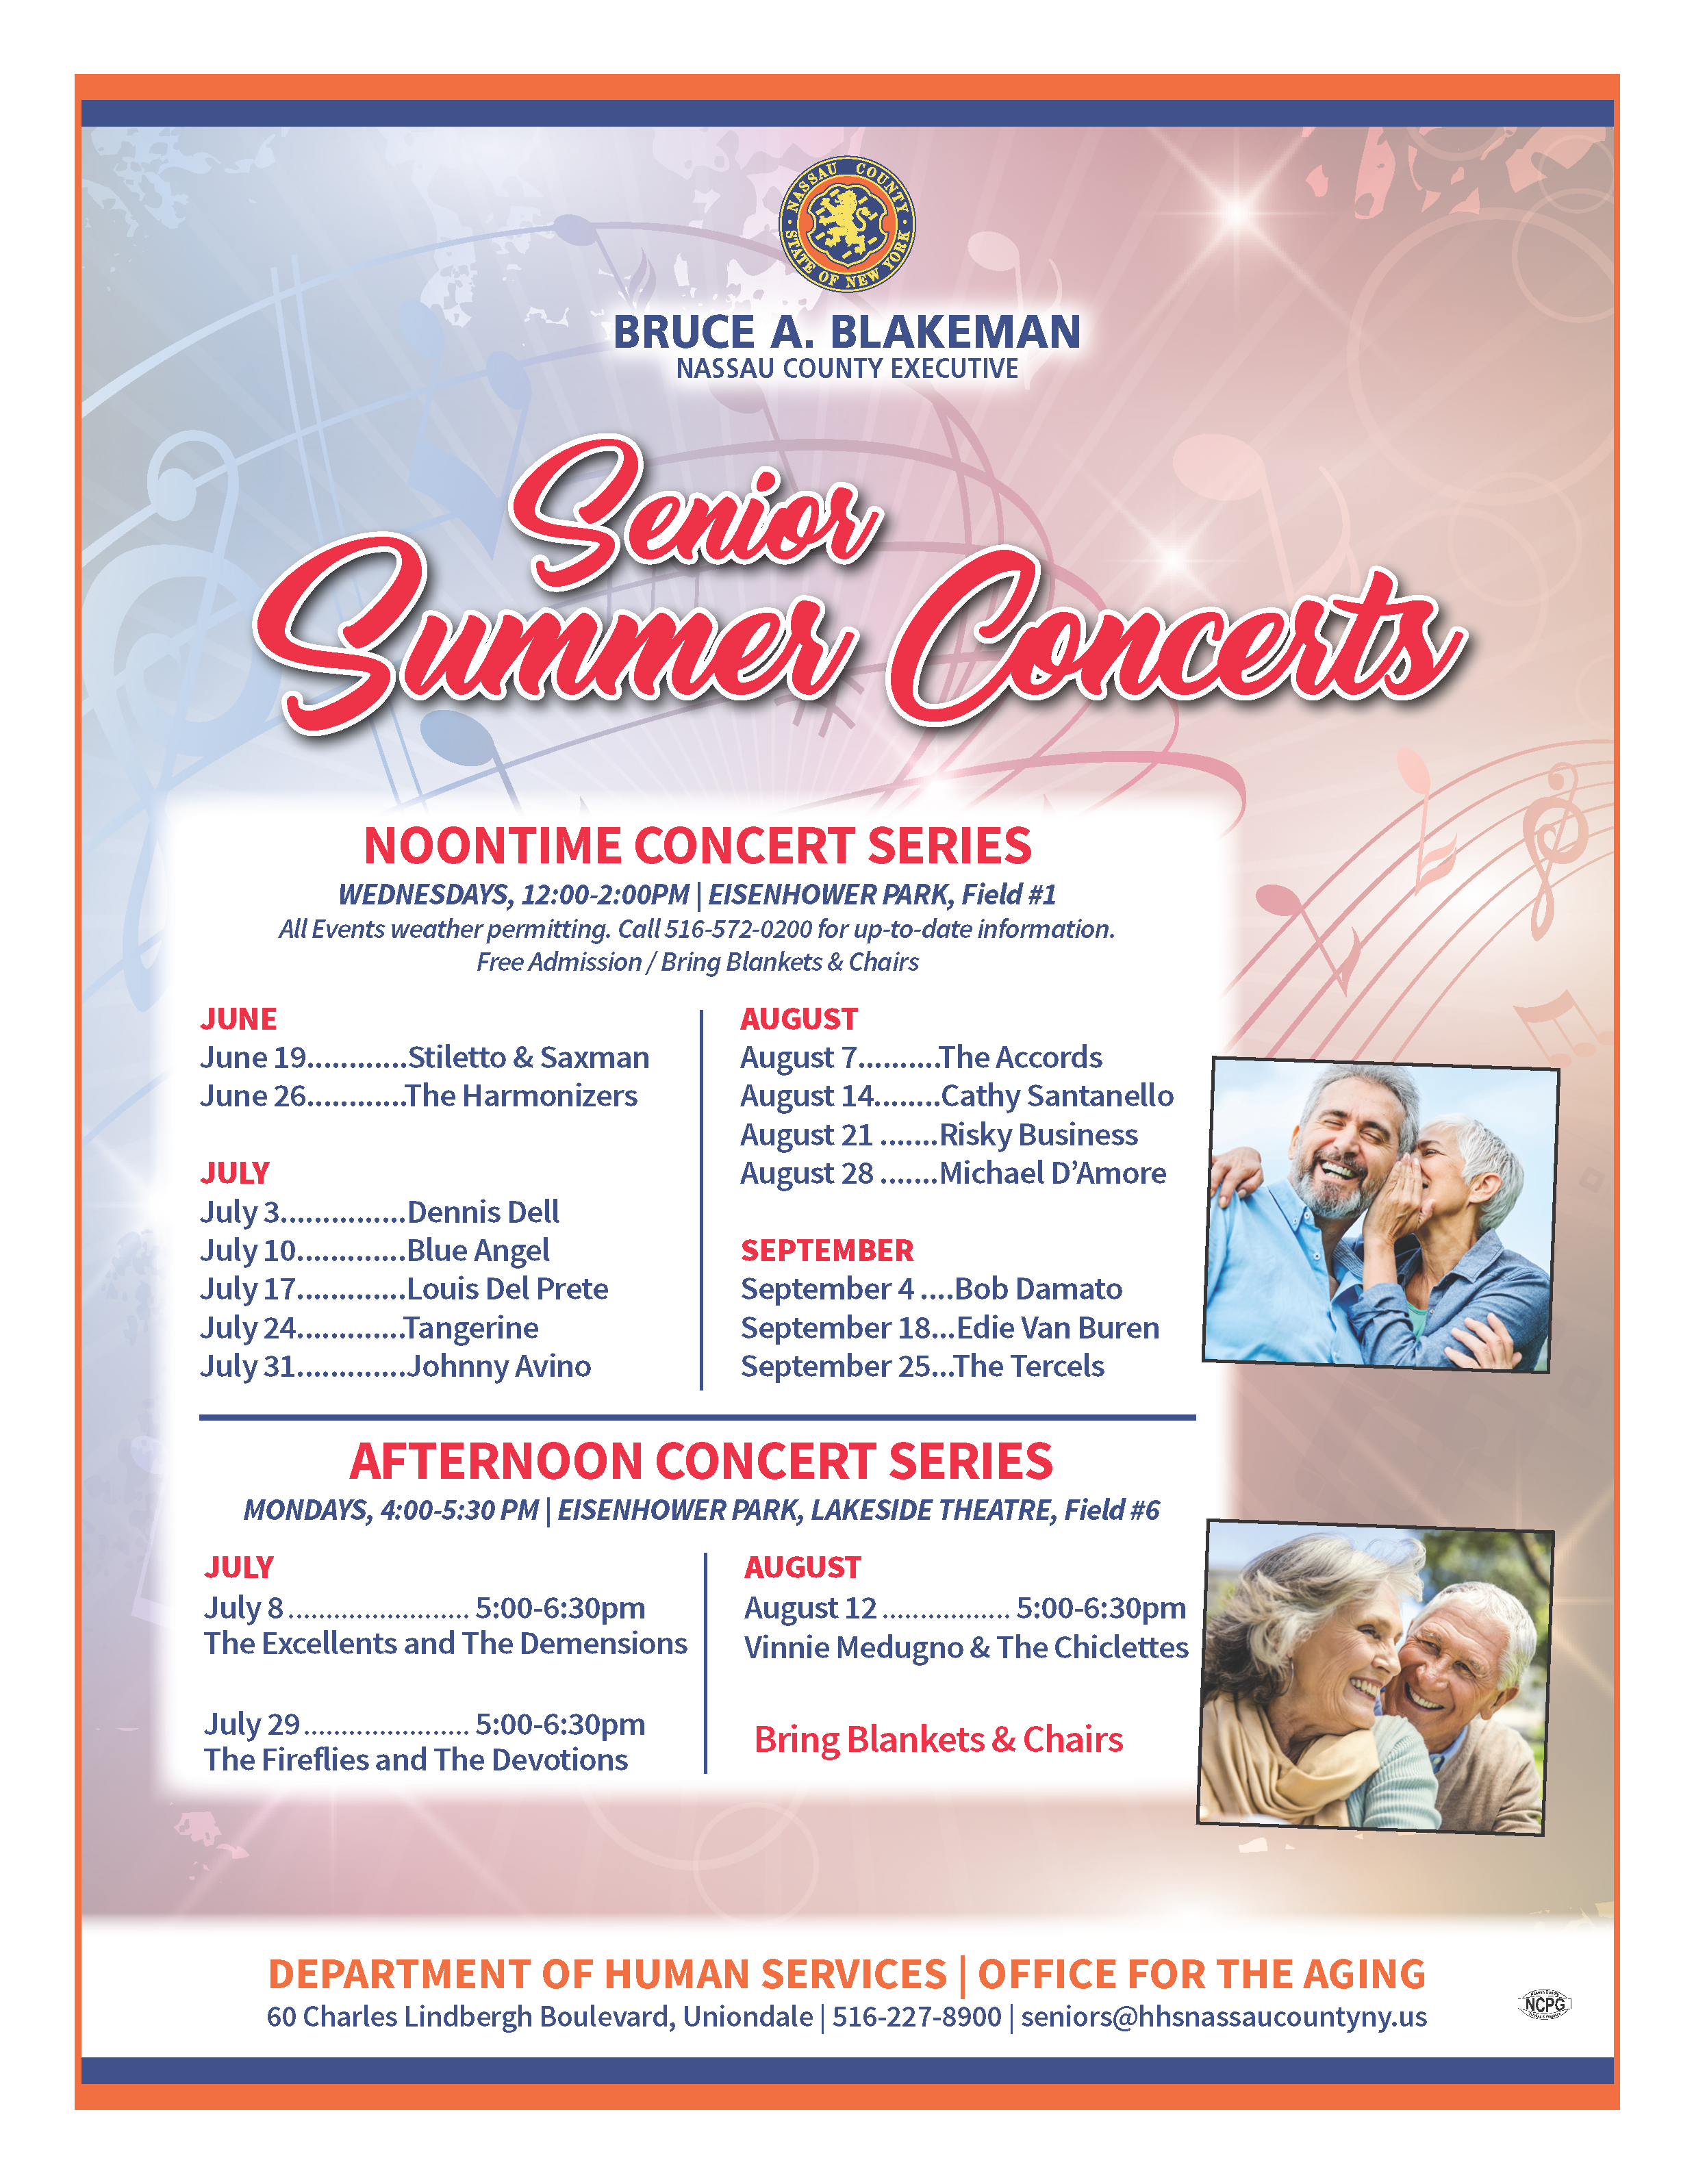 Senior Summer Concerts at Eisenhower Park, Field 1. call 516-572-0200 for up-to-date information.